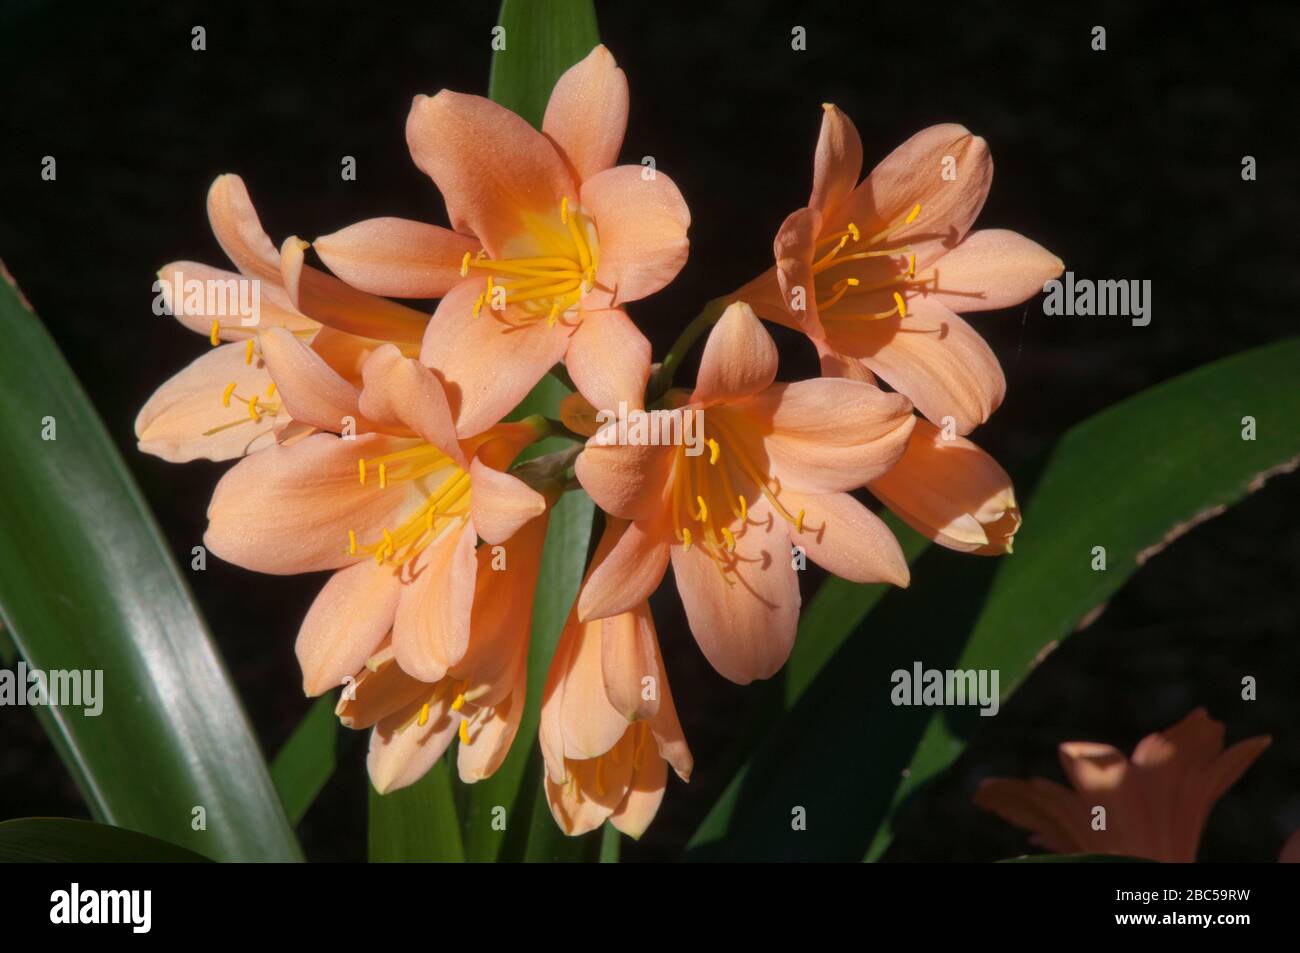 Sydney Australia, flower head of a pink clivia miniata plant native to South Africa and Swaziland Stock Photo